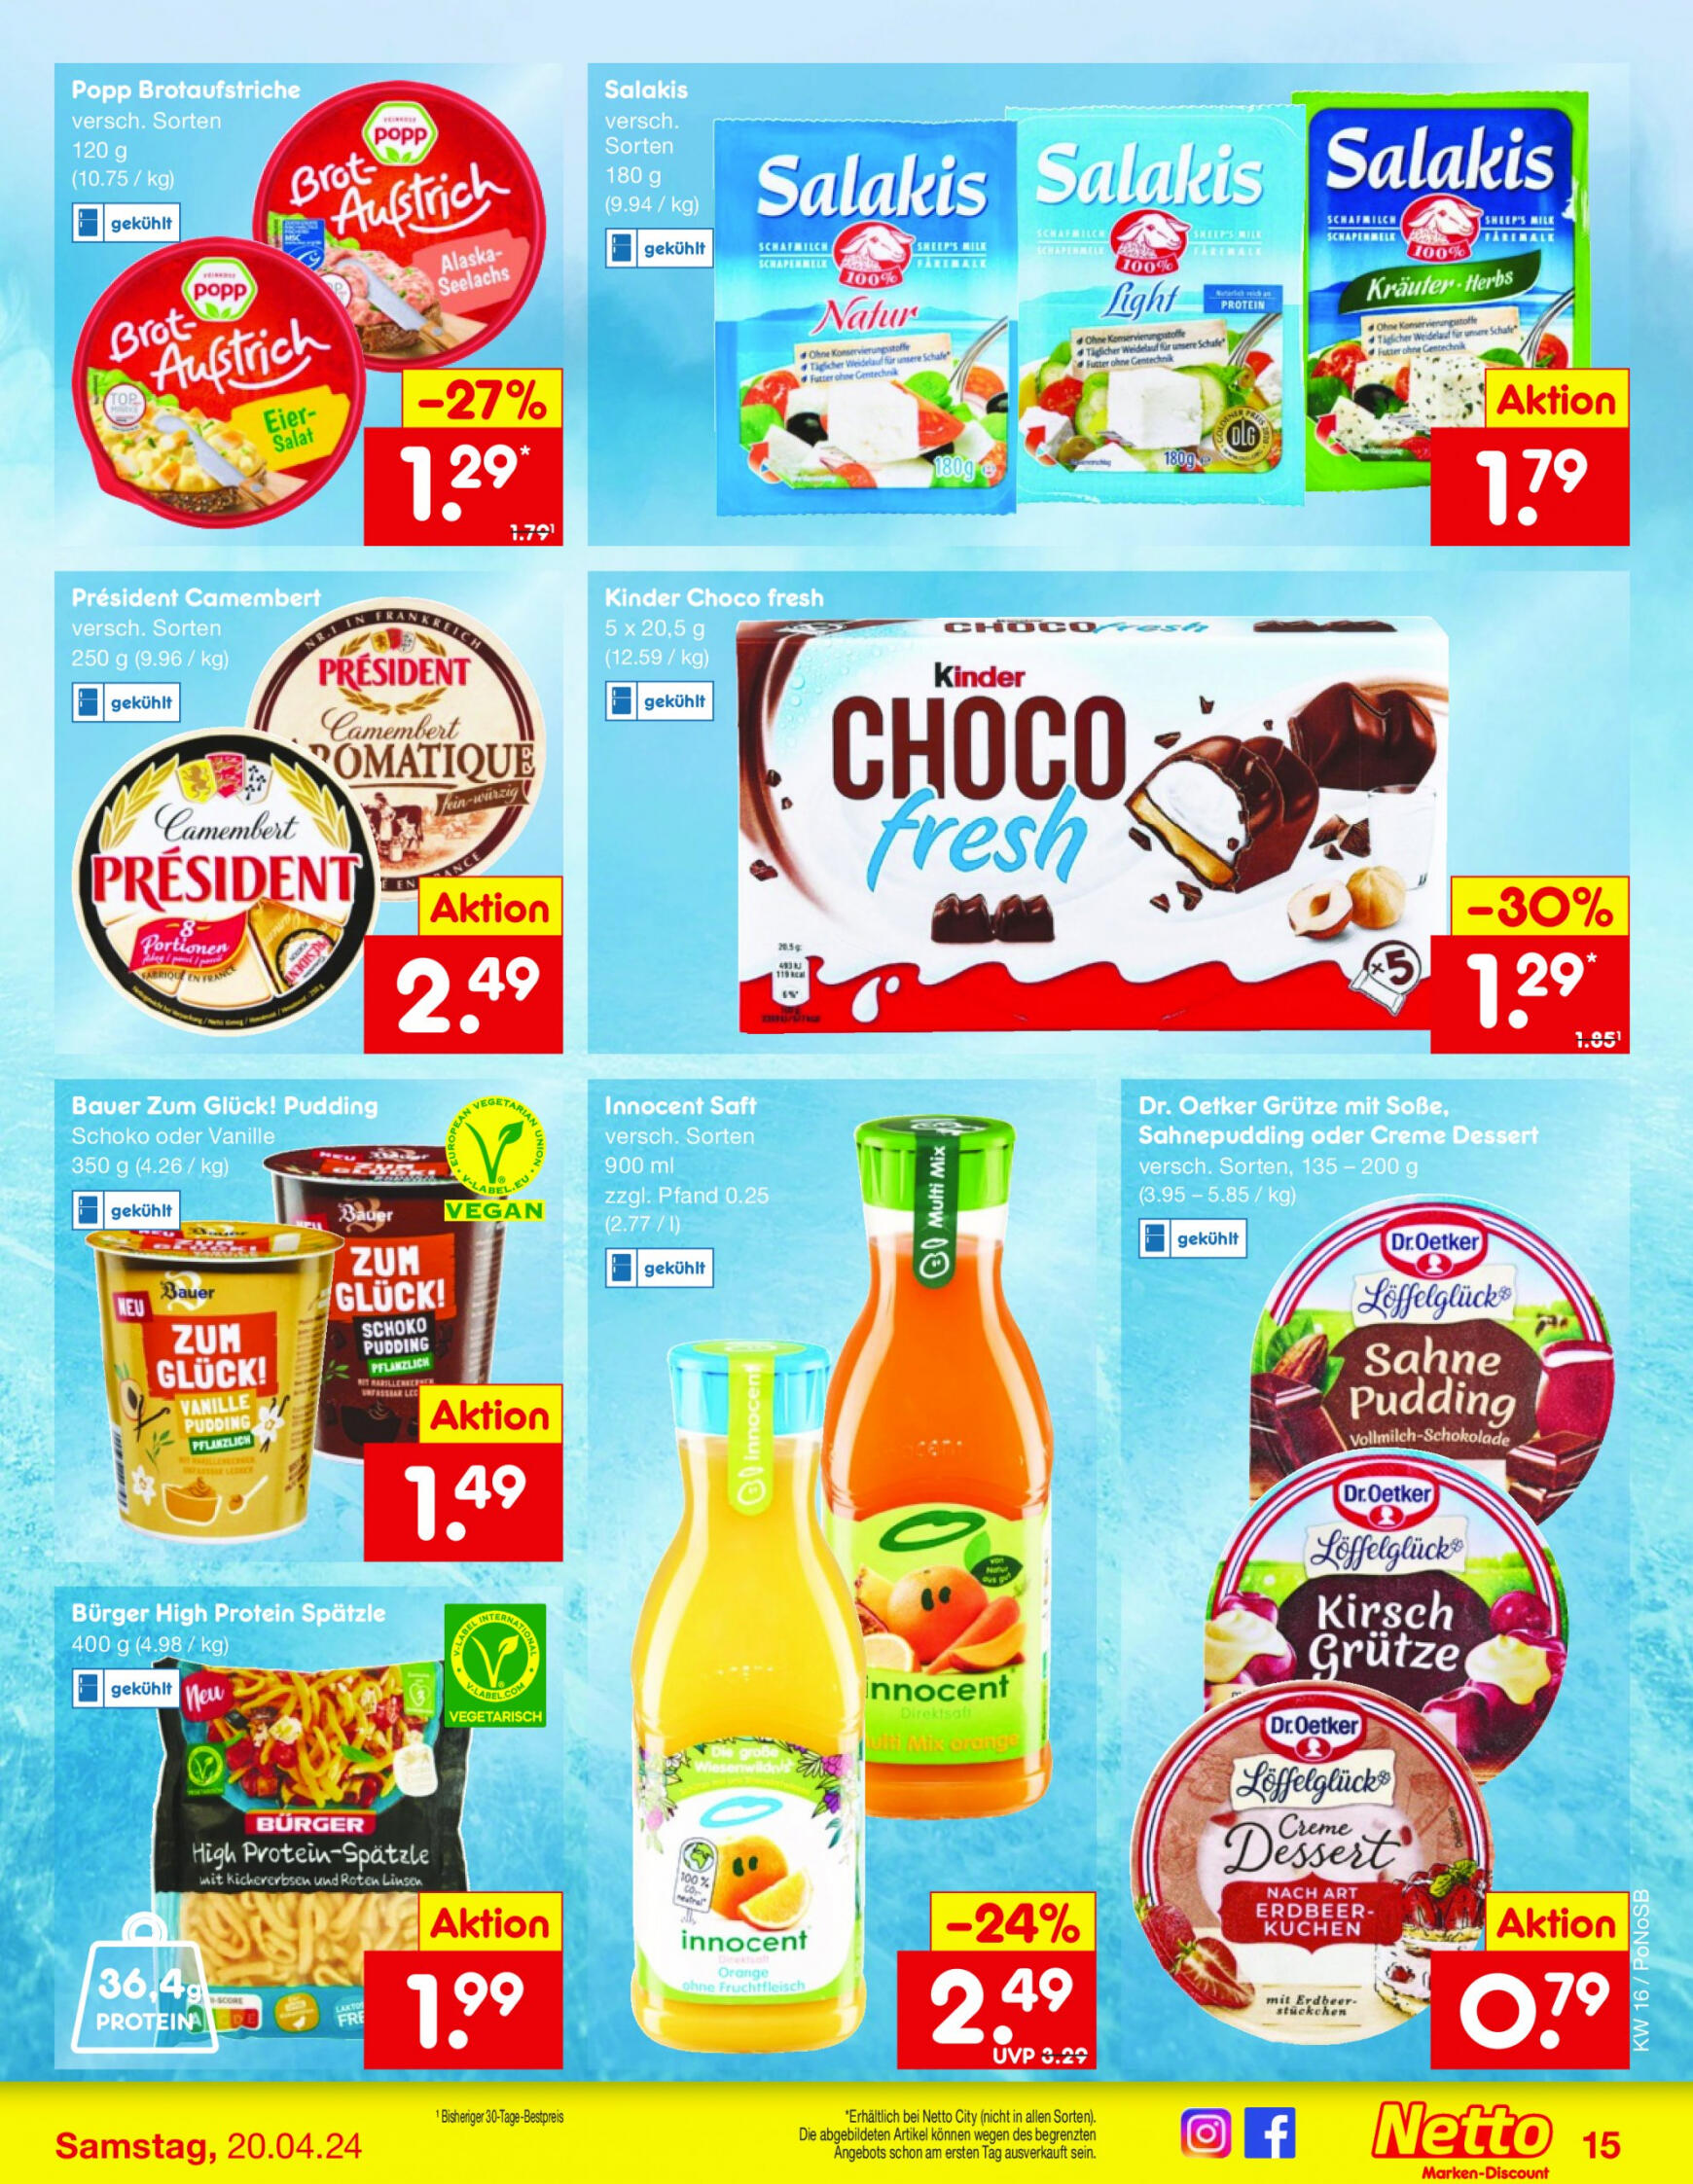 netto - Flyer Netto aktuell 15.04. - 20.04. - page: 15